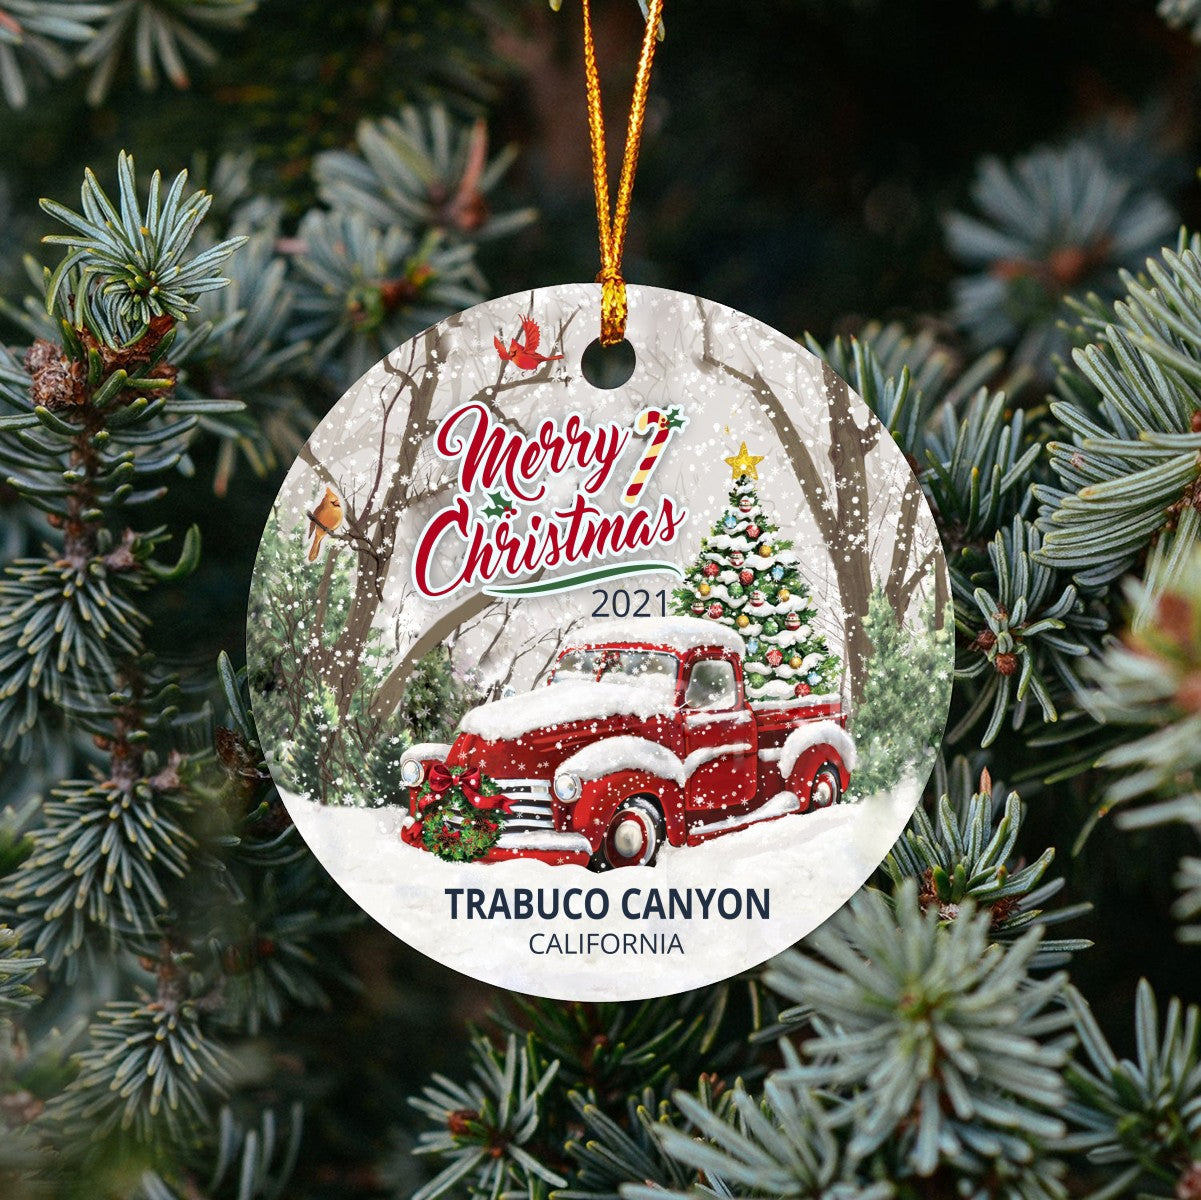 Christmas Tree Ornaments Trabuco Canyon - Ornament With Name City, State Trabuco Canyon California CA Ornament - Red Truck Xmas Ornaments 3'' Plastic Gift For Family, Friend And Housewarming